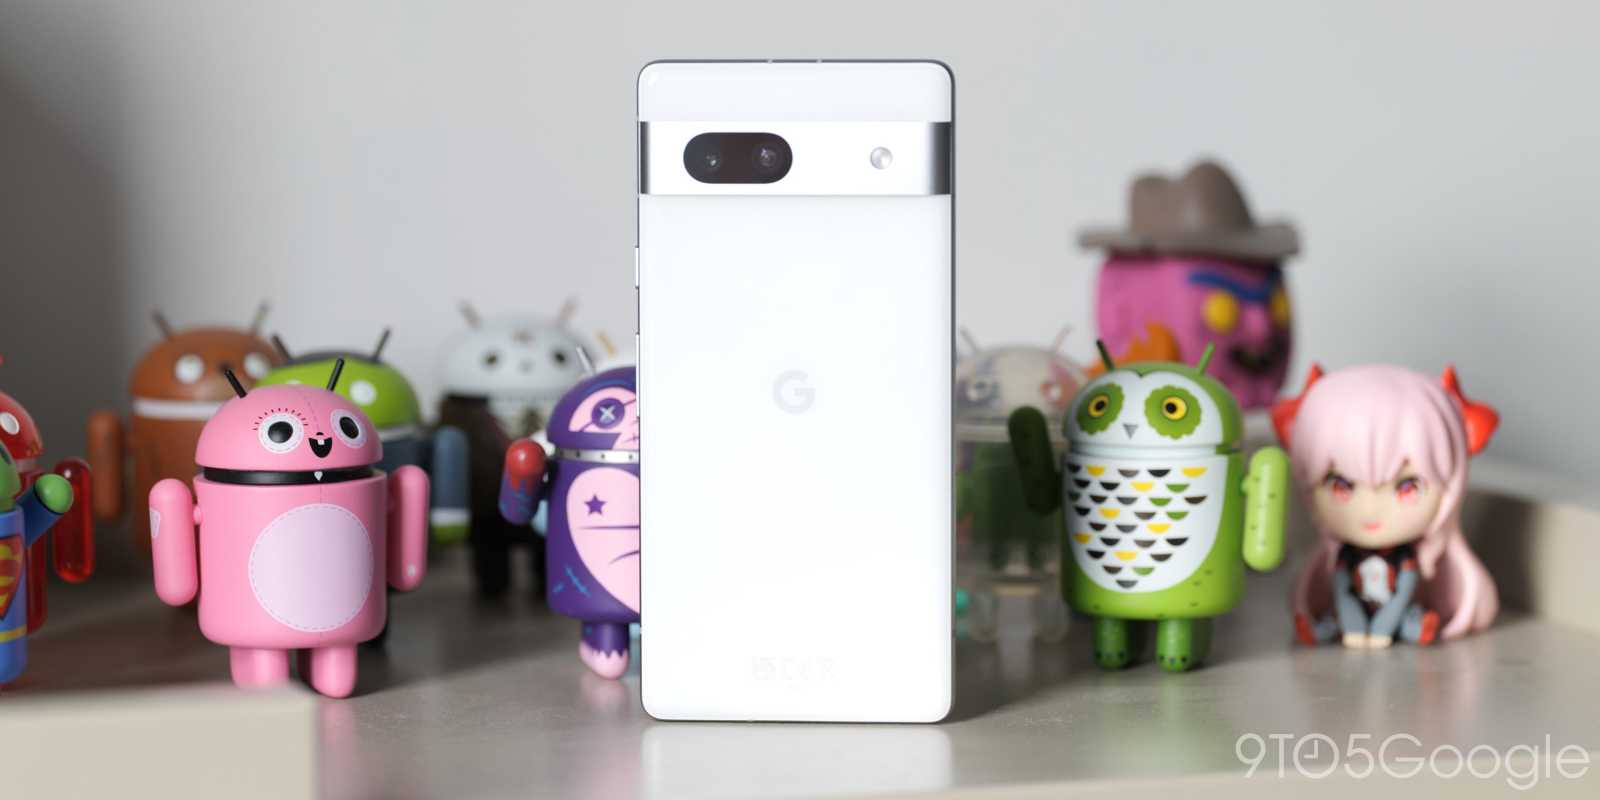 Pixel 7a surrounded by Android figurines